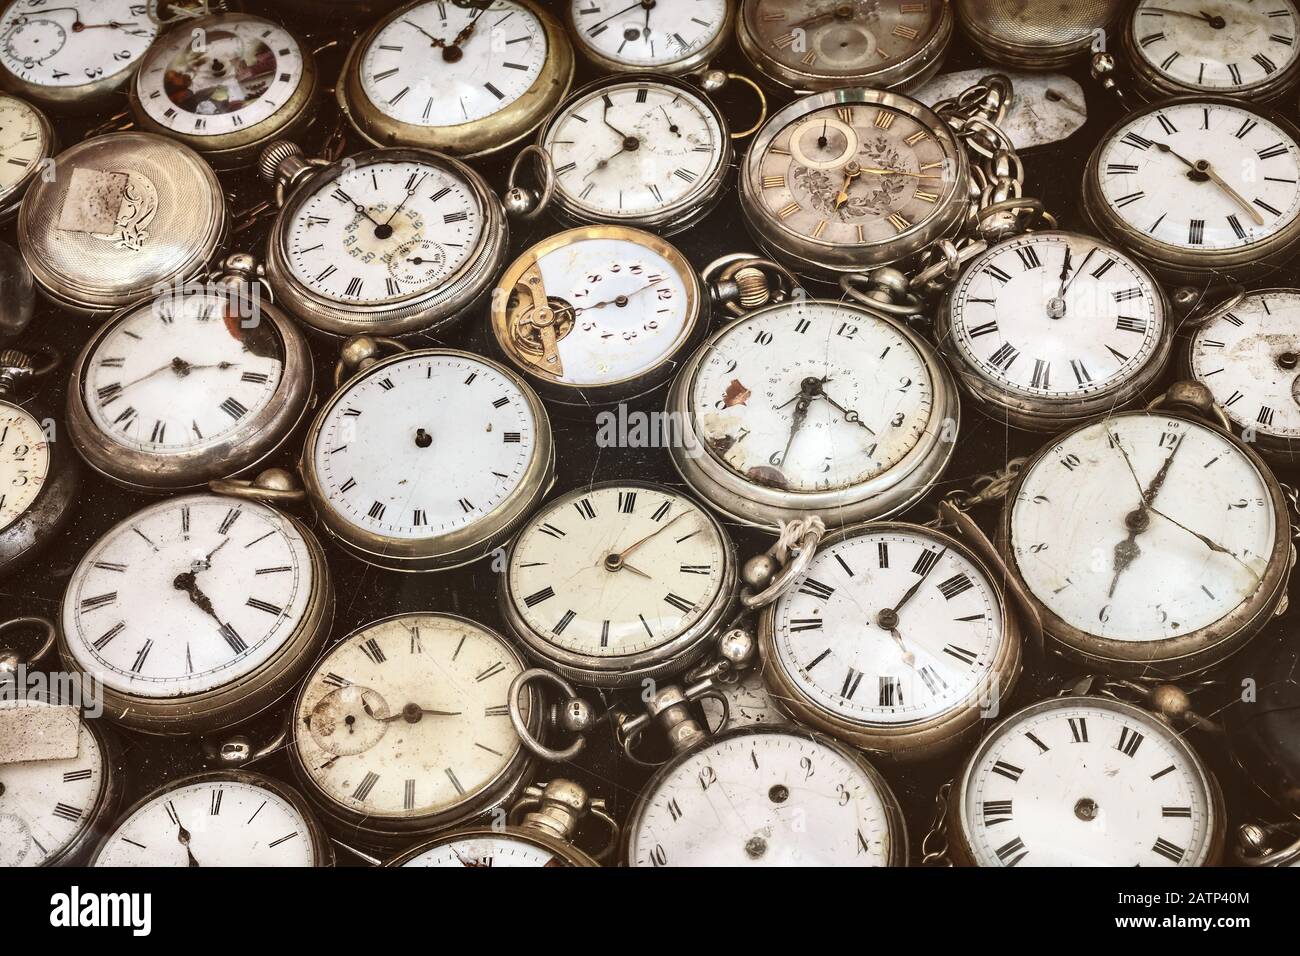 Retro styled image of old scratched and run down pocket watches Stock Photo